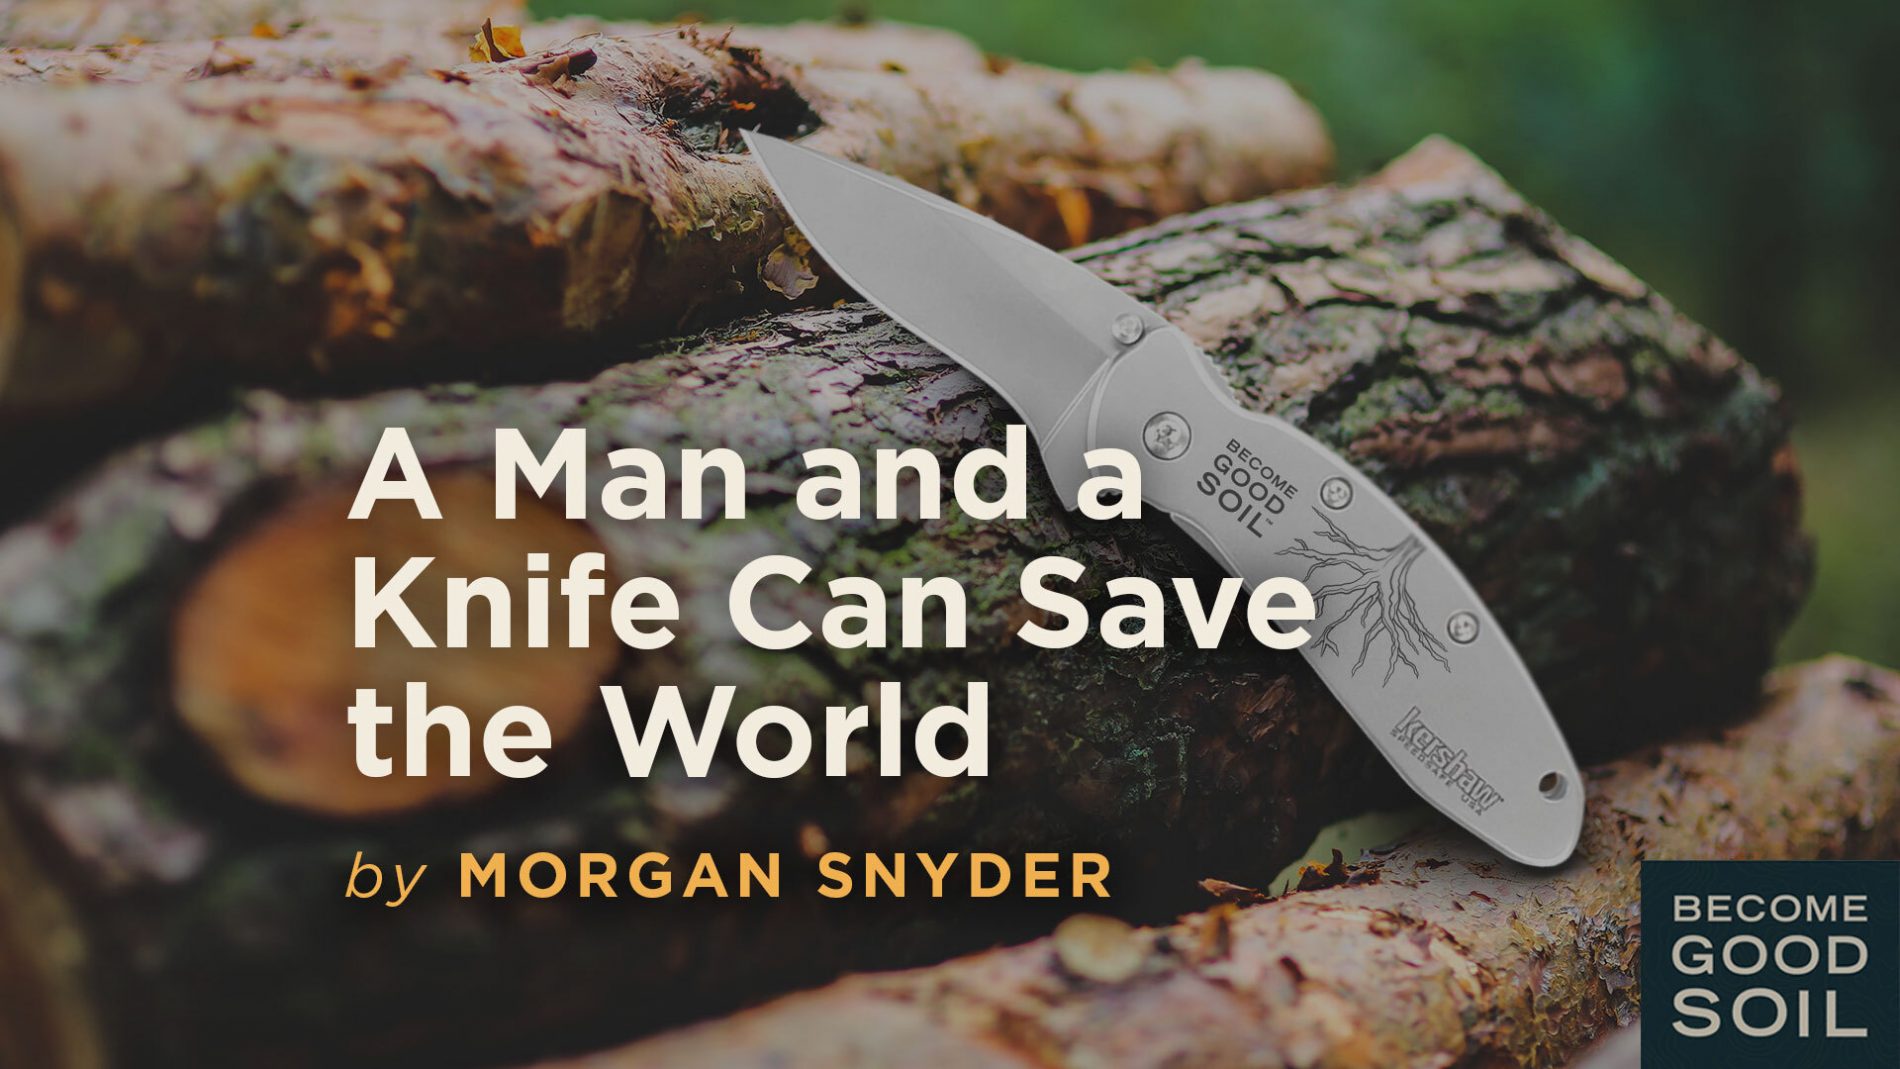 A Man and a Knife Can Save the World - Become Good Soil